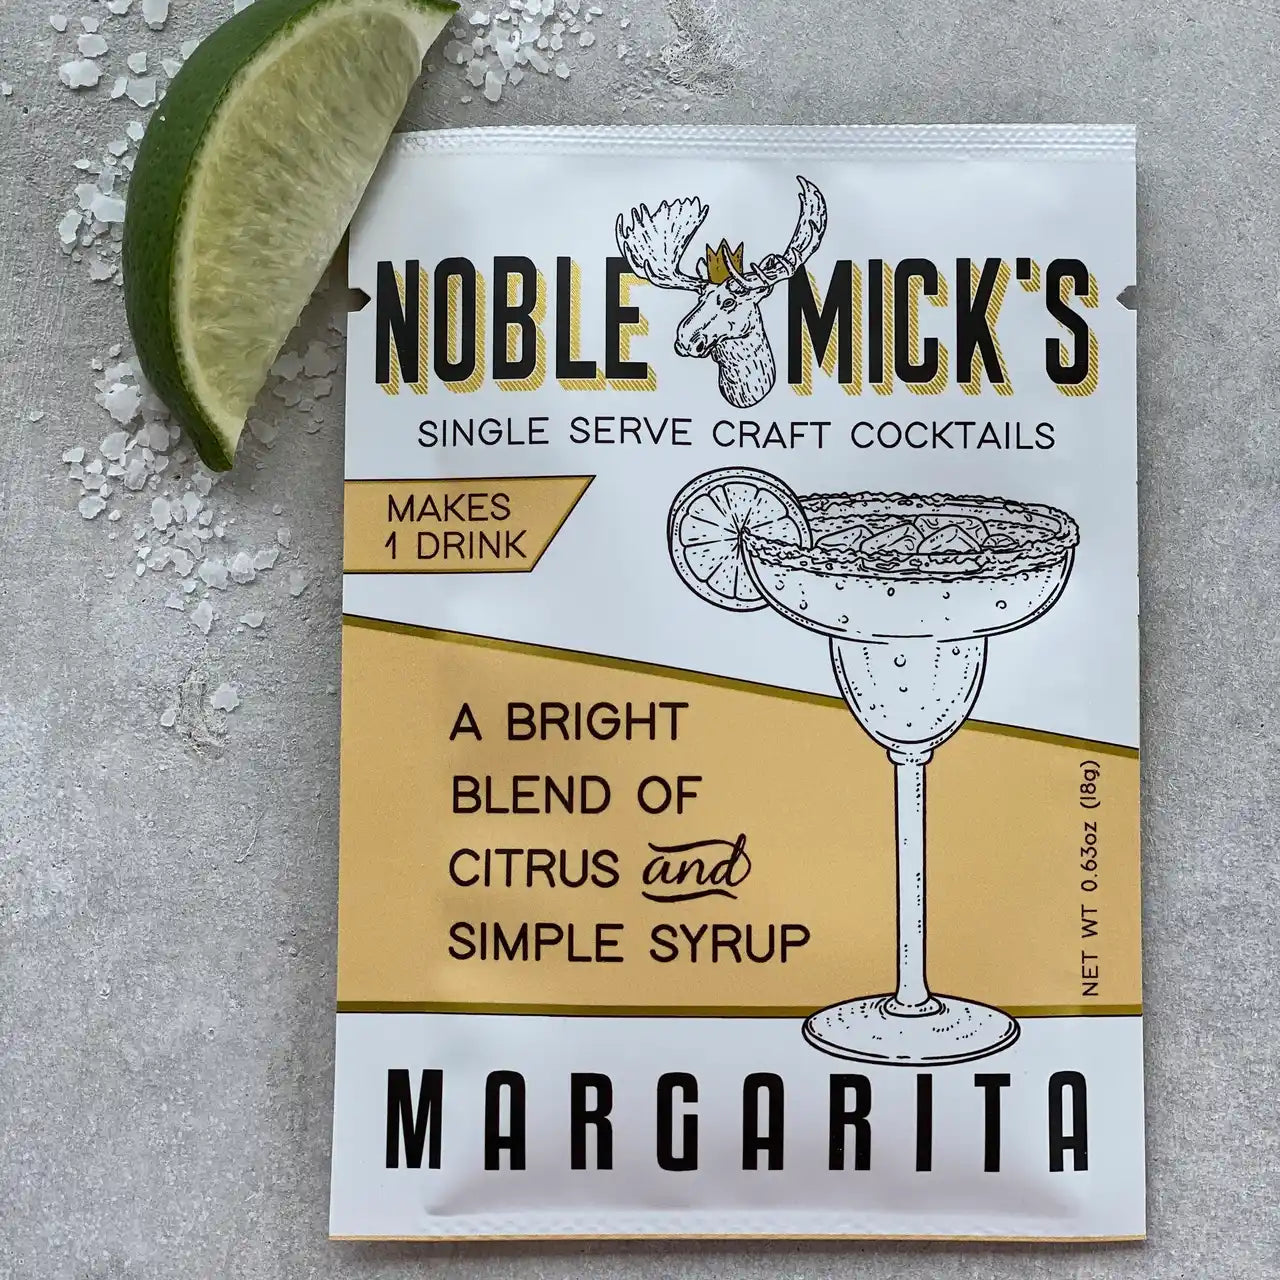 noble mick's single serve packet of Margarita mix on a bar top with salt and a lime.